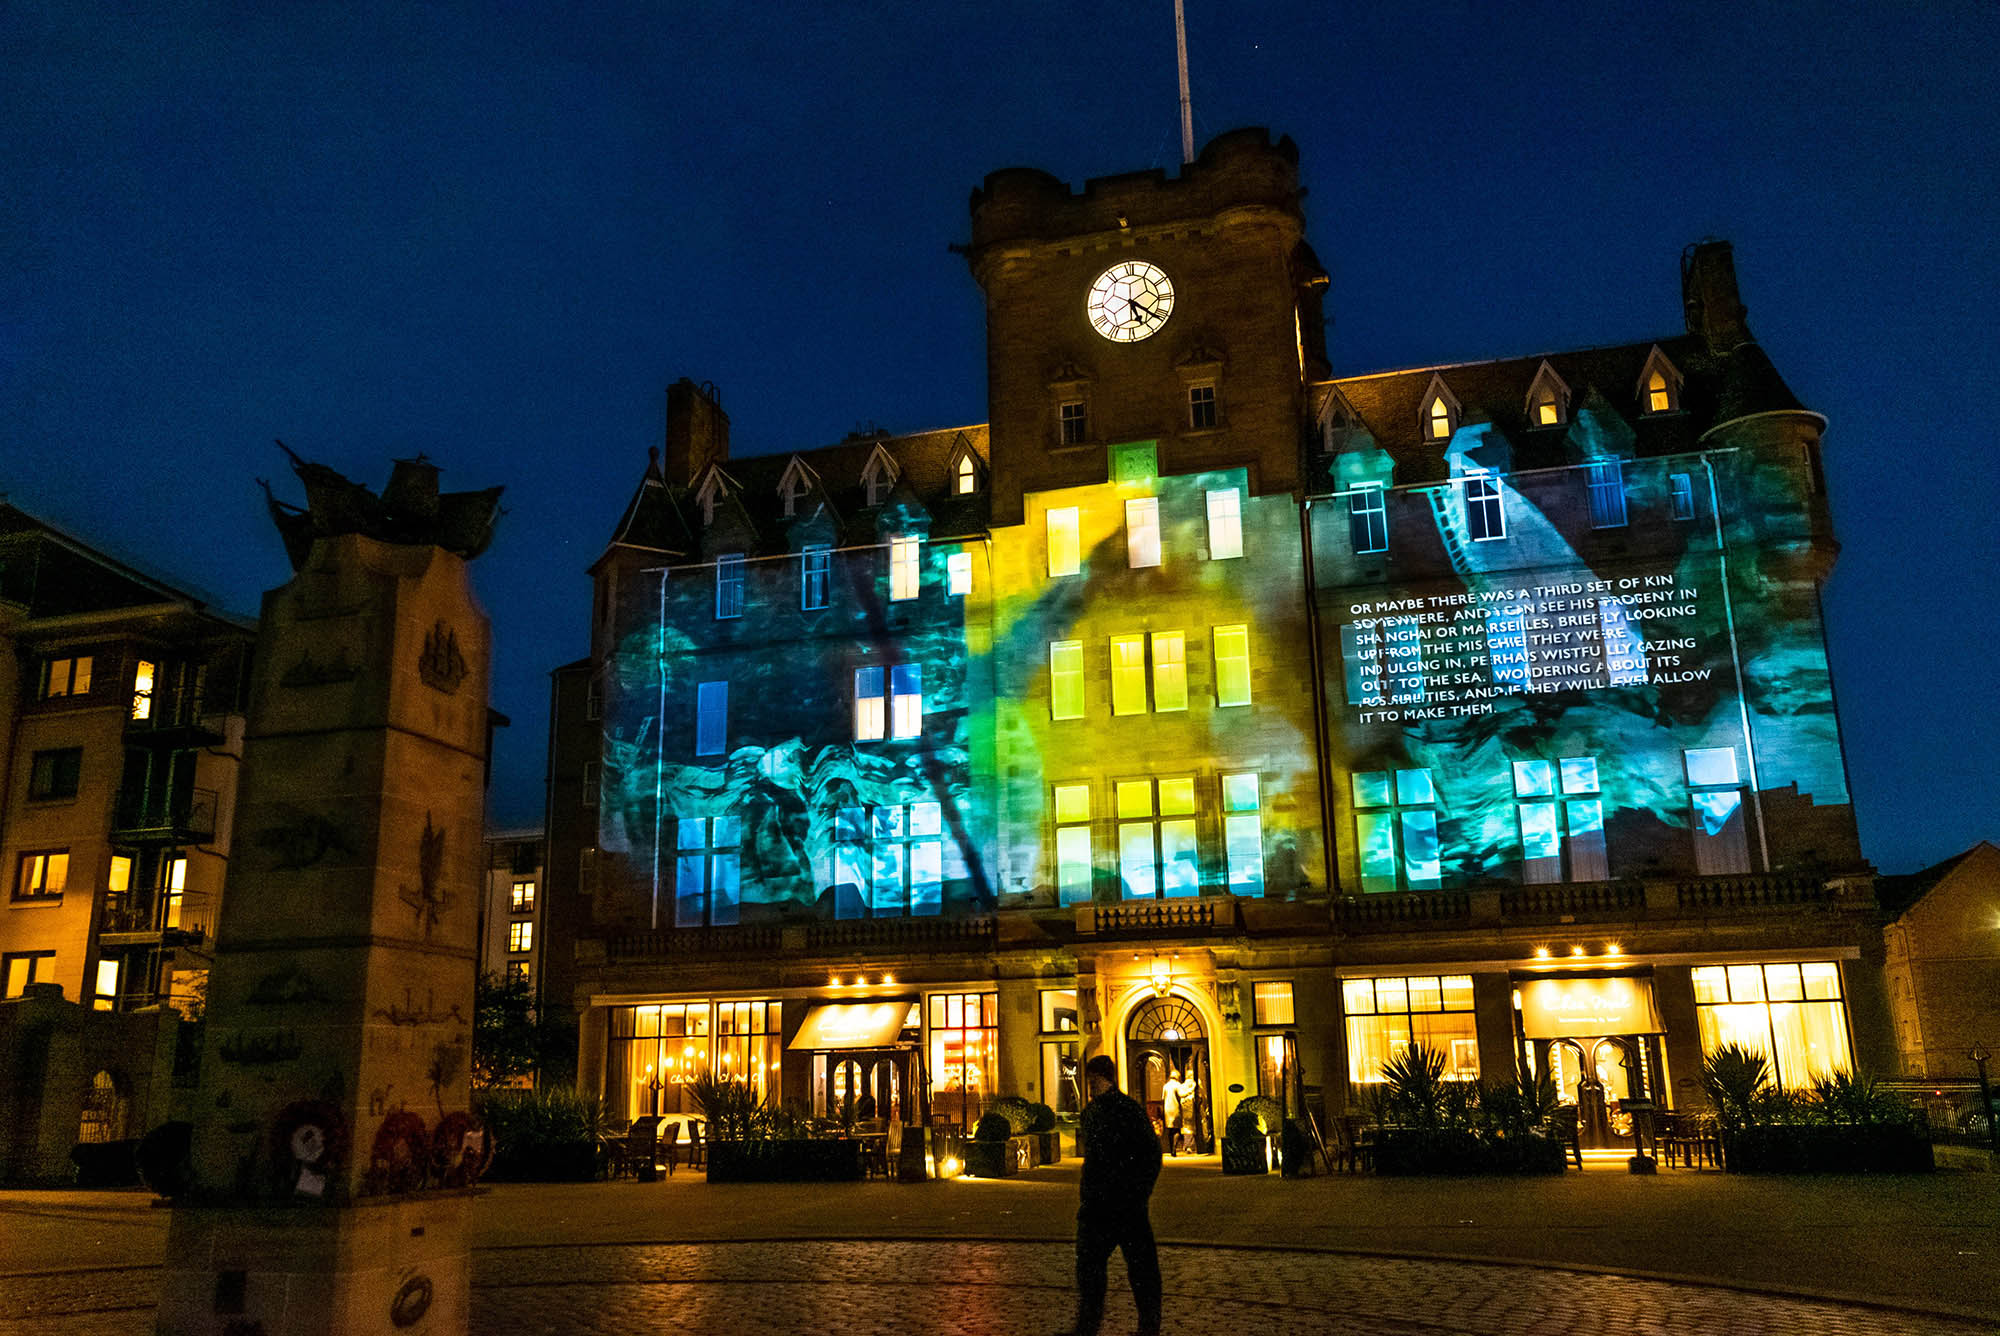 Message from the skies, projection on Malmaison Leith